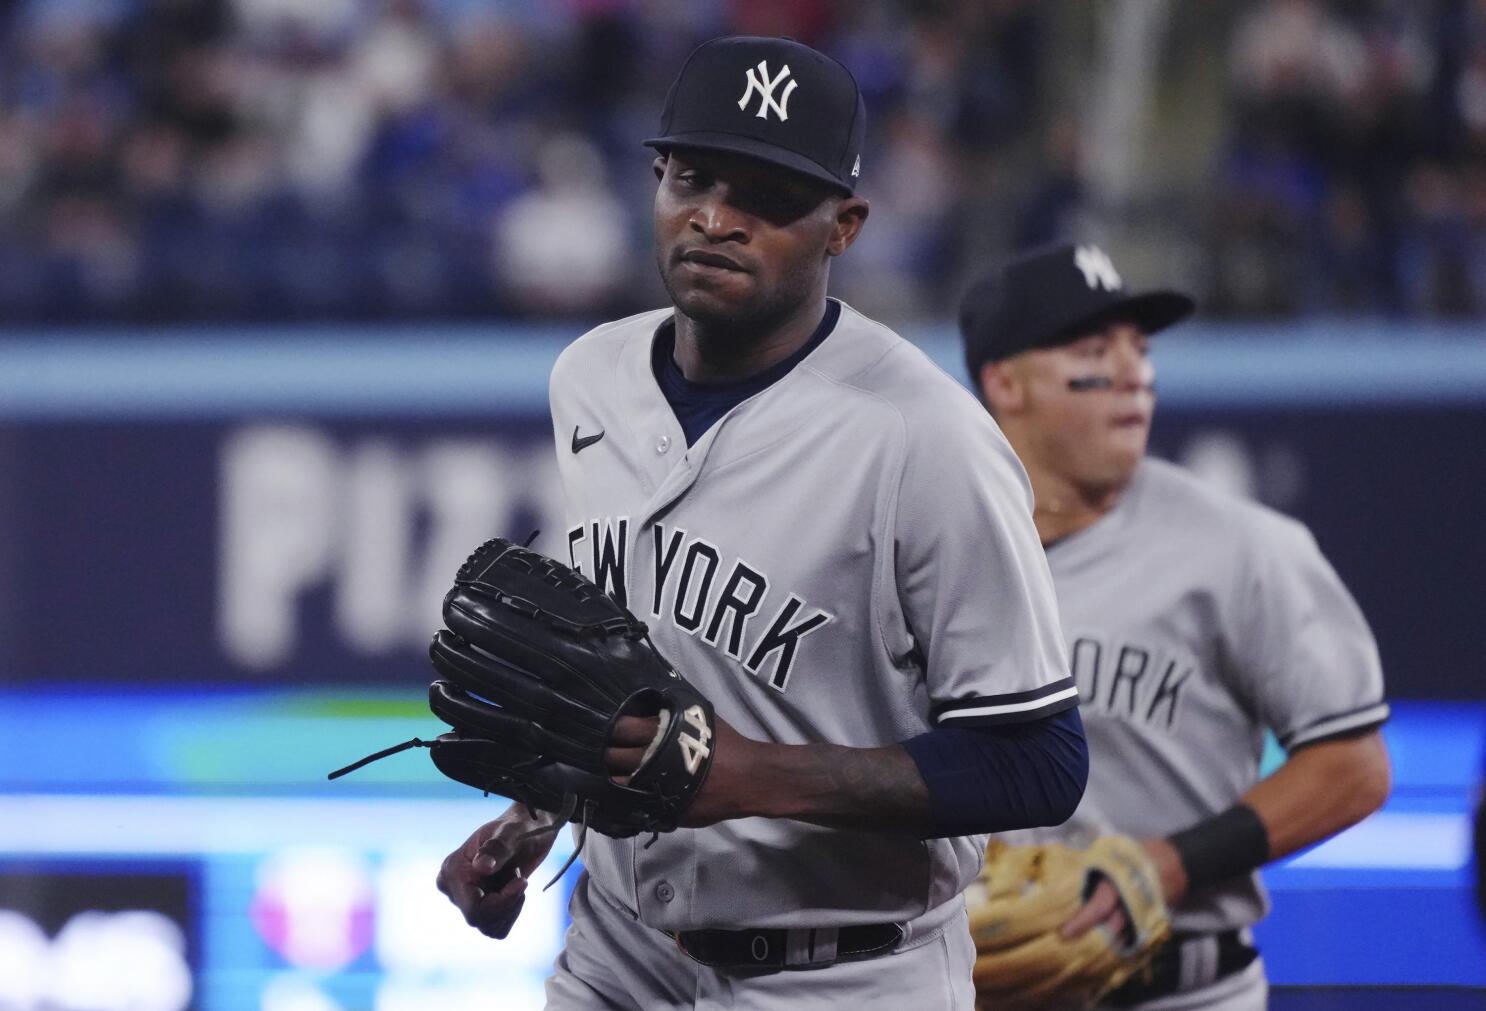 Germán ejected, Judge booed as cheating allegations swirl around Yankees